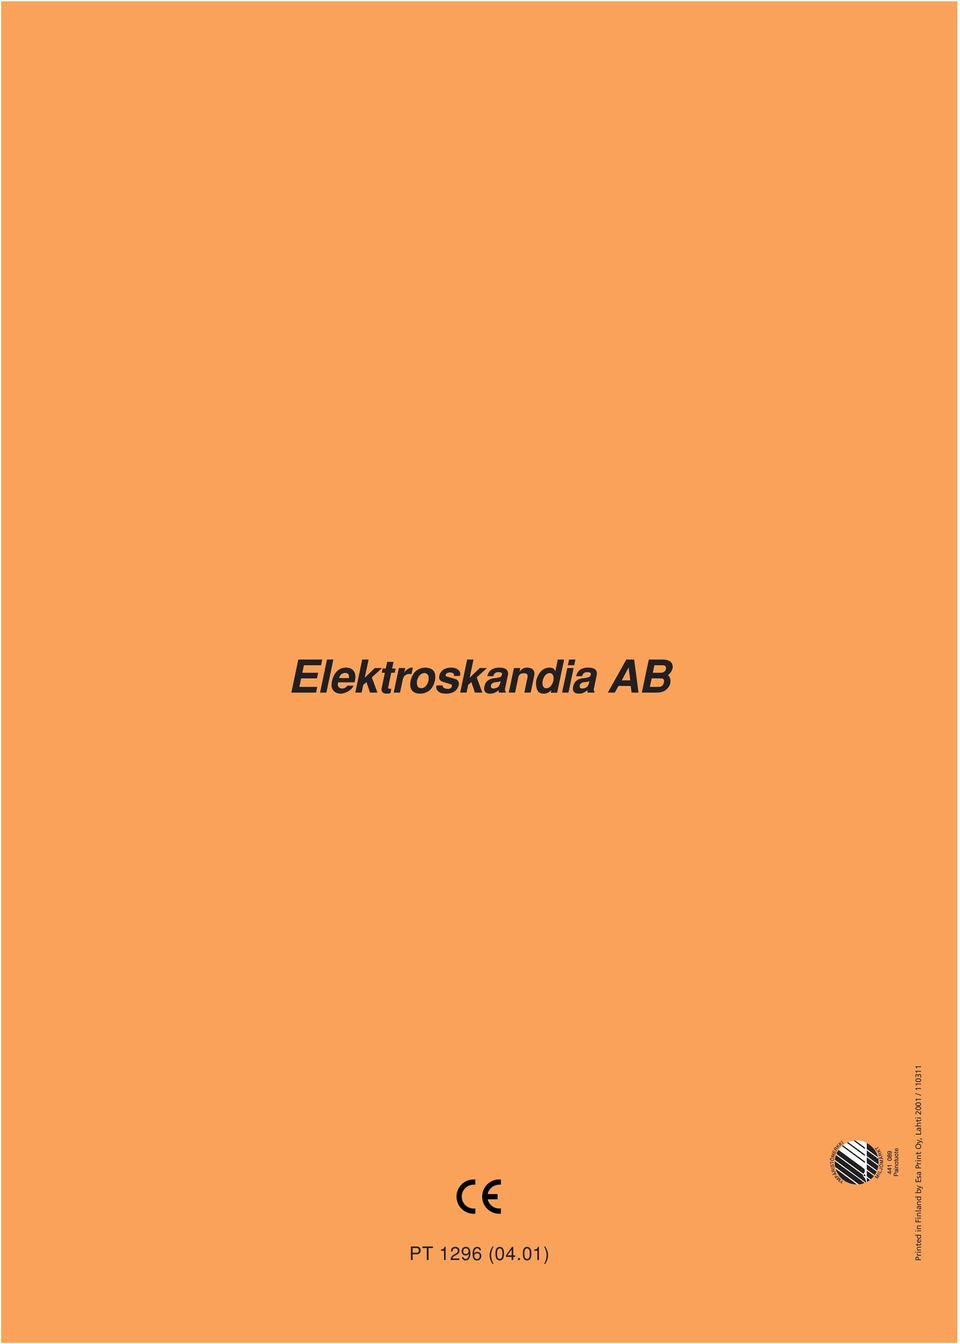 Printed in Finland by Esa